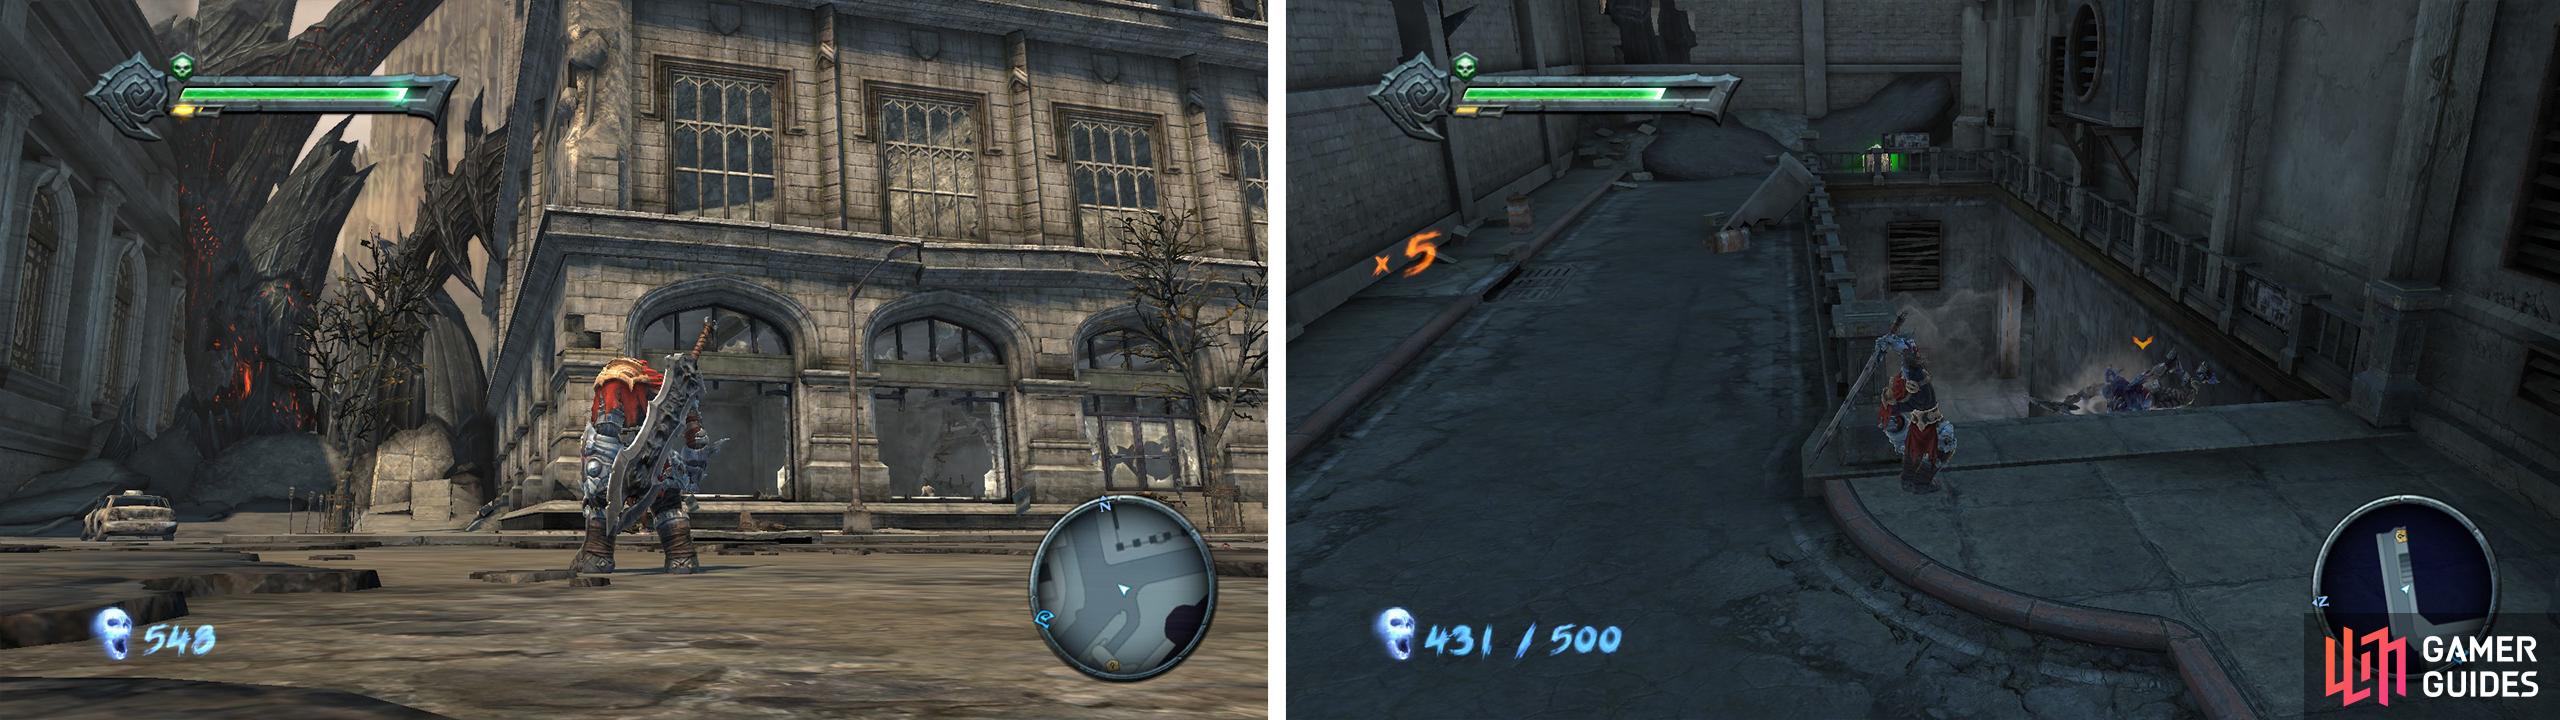 Additional Blue Soul Chests can be found inside the derelict building (left) and down the stairs pictured (right).